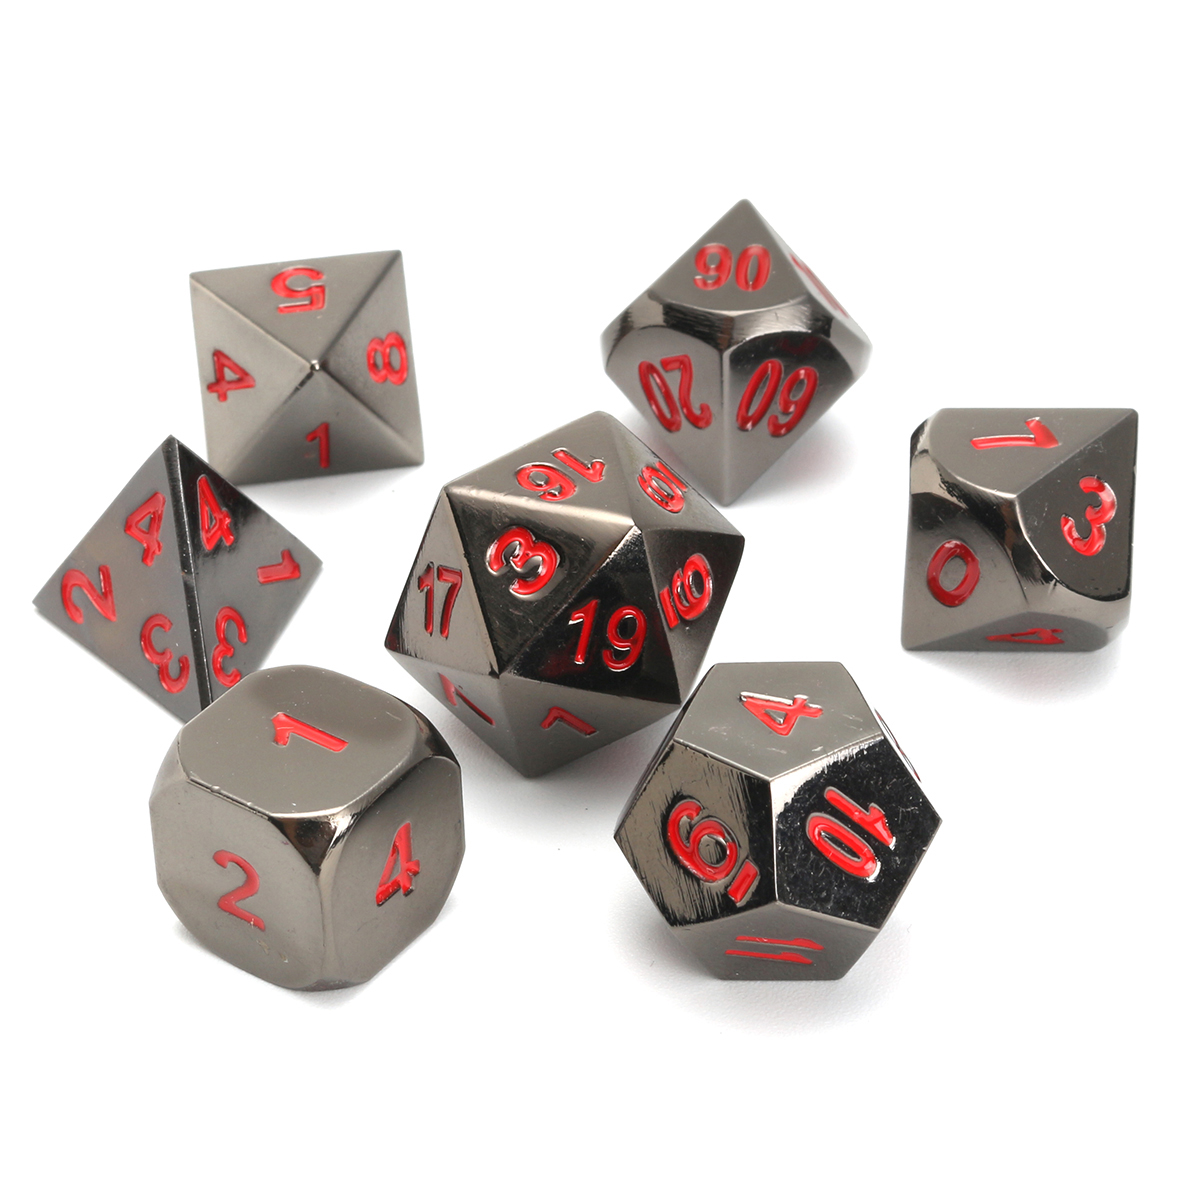 New-Metal-Polyhedral-Dice-with-Bag-Green-Red-7-Piece-Metal-Set-DnD-RPG-1239419-1